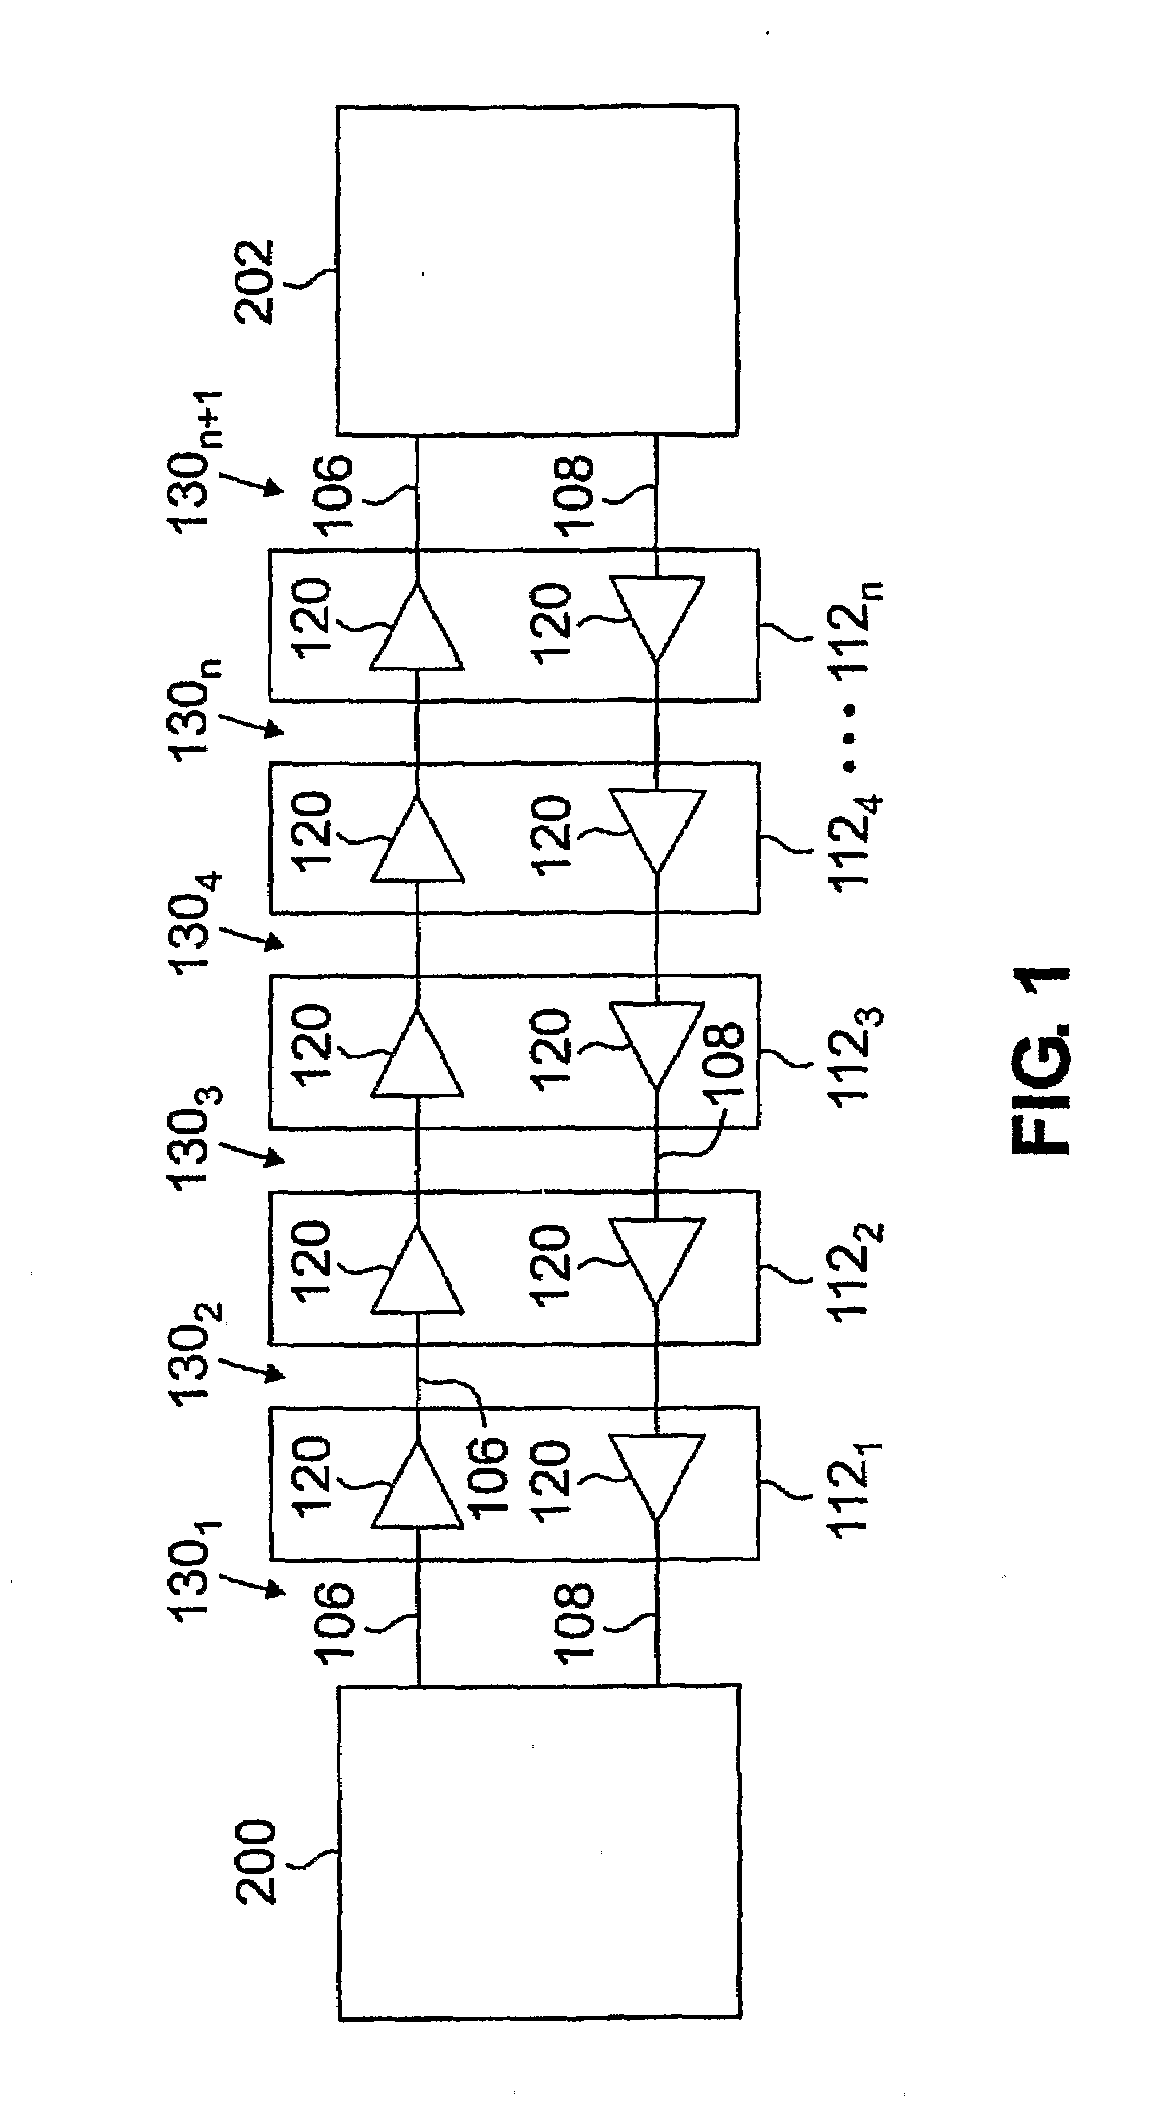 Method and Apparatus for Sensing Channel Availability in Wireless Networks